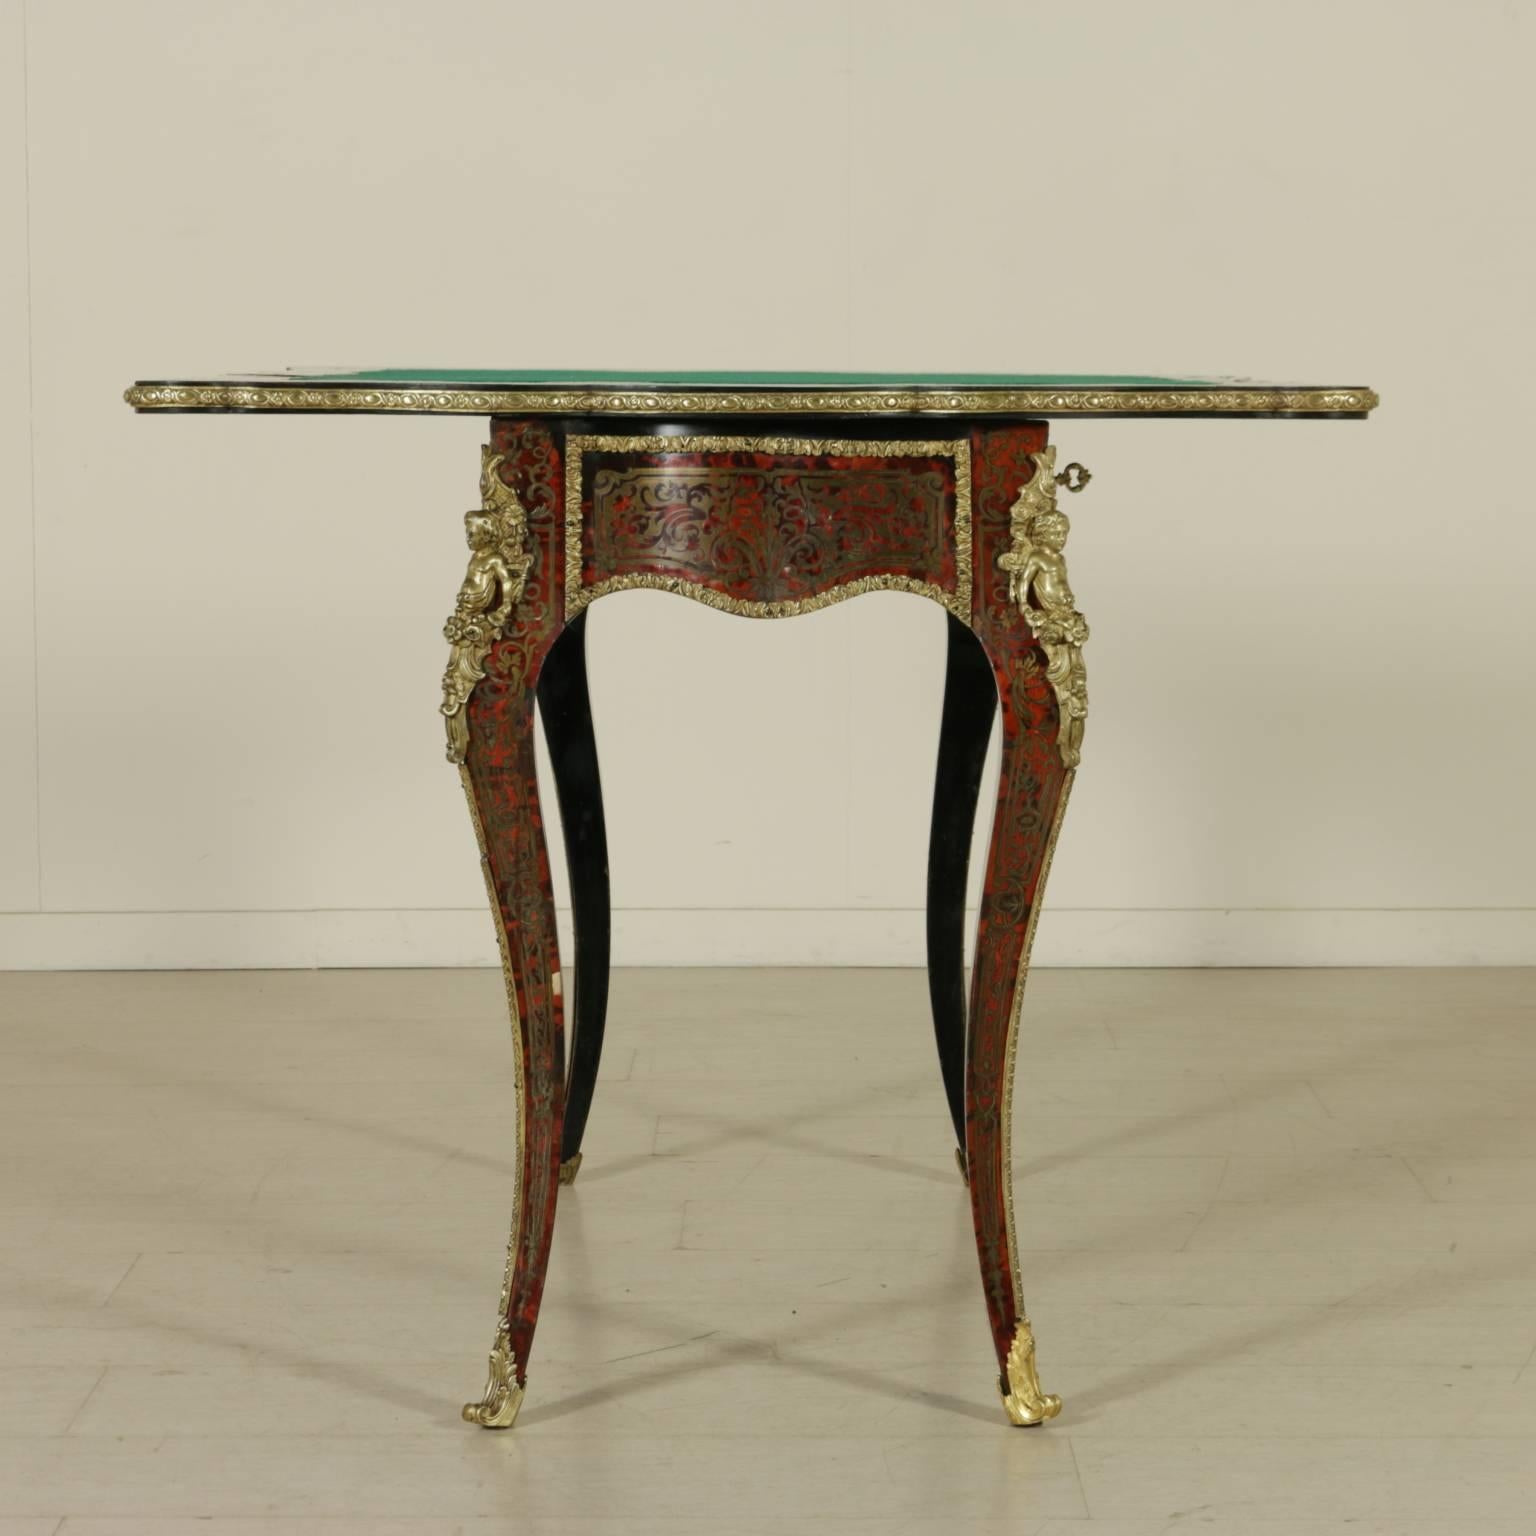 Ebony Boulle Style Richly Inlaid Game Table France, Second Half of the 19th Century